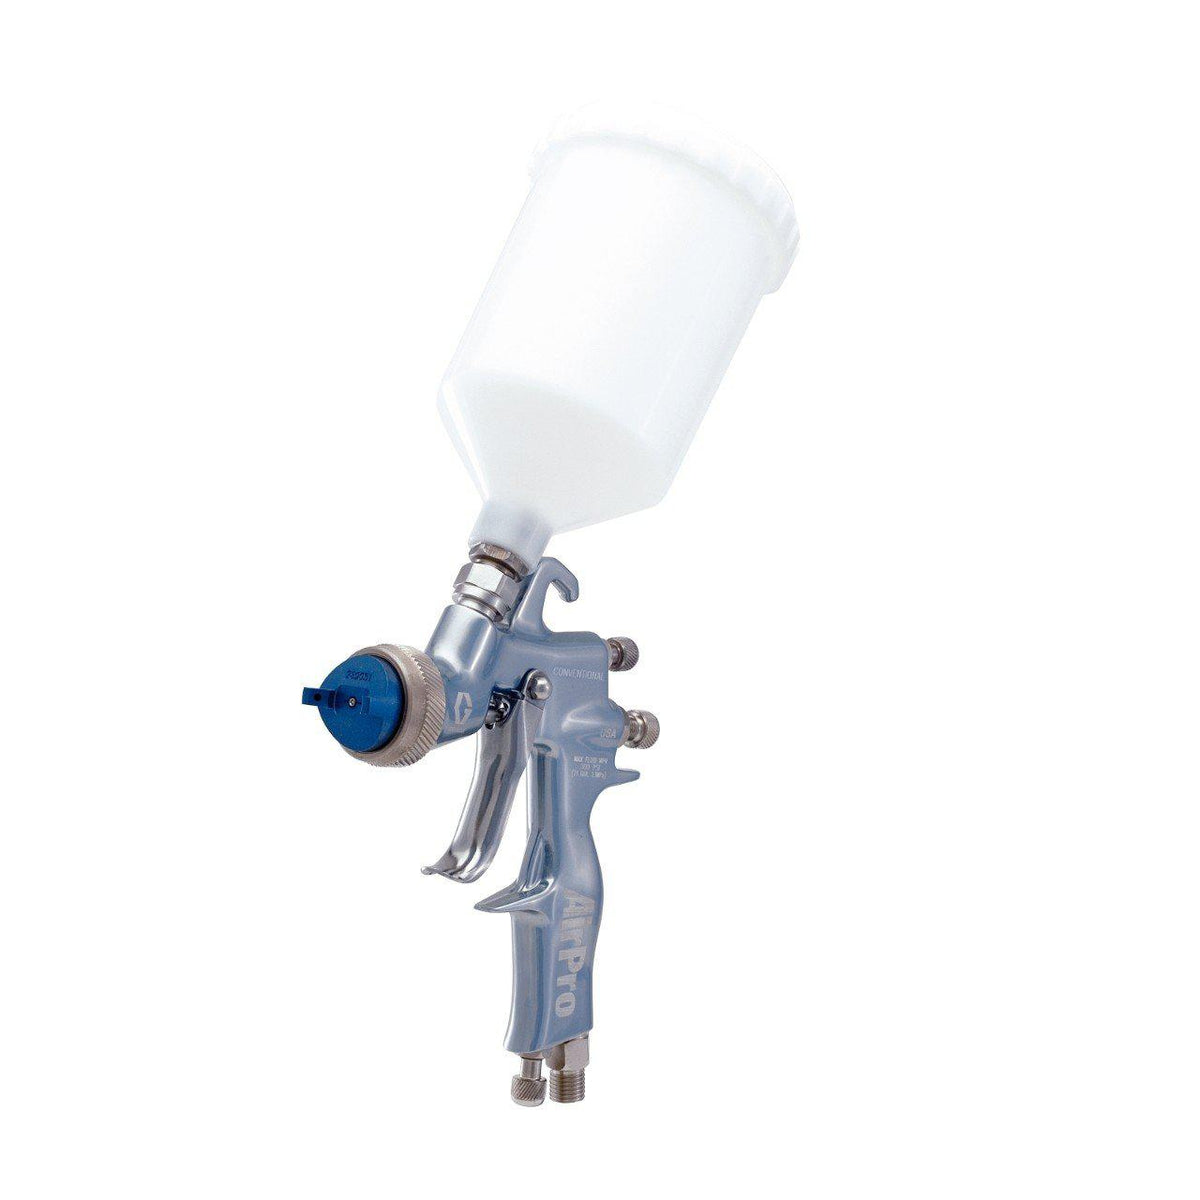 Graco Air Pro Conventional Gravity Feed Spray Gun w/ 0.055 inch (1.4 mm)  Nozzle & Plastic Gravity Cup